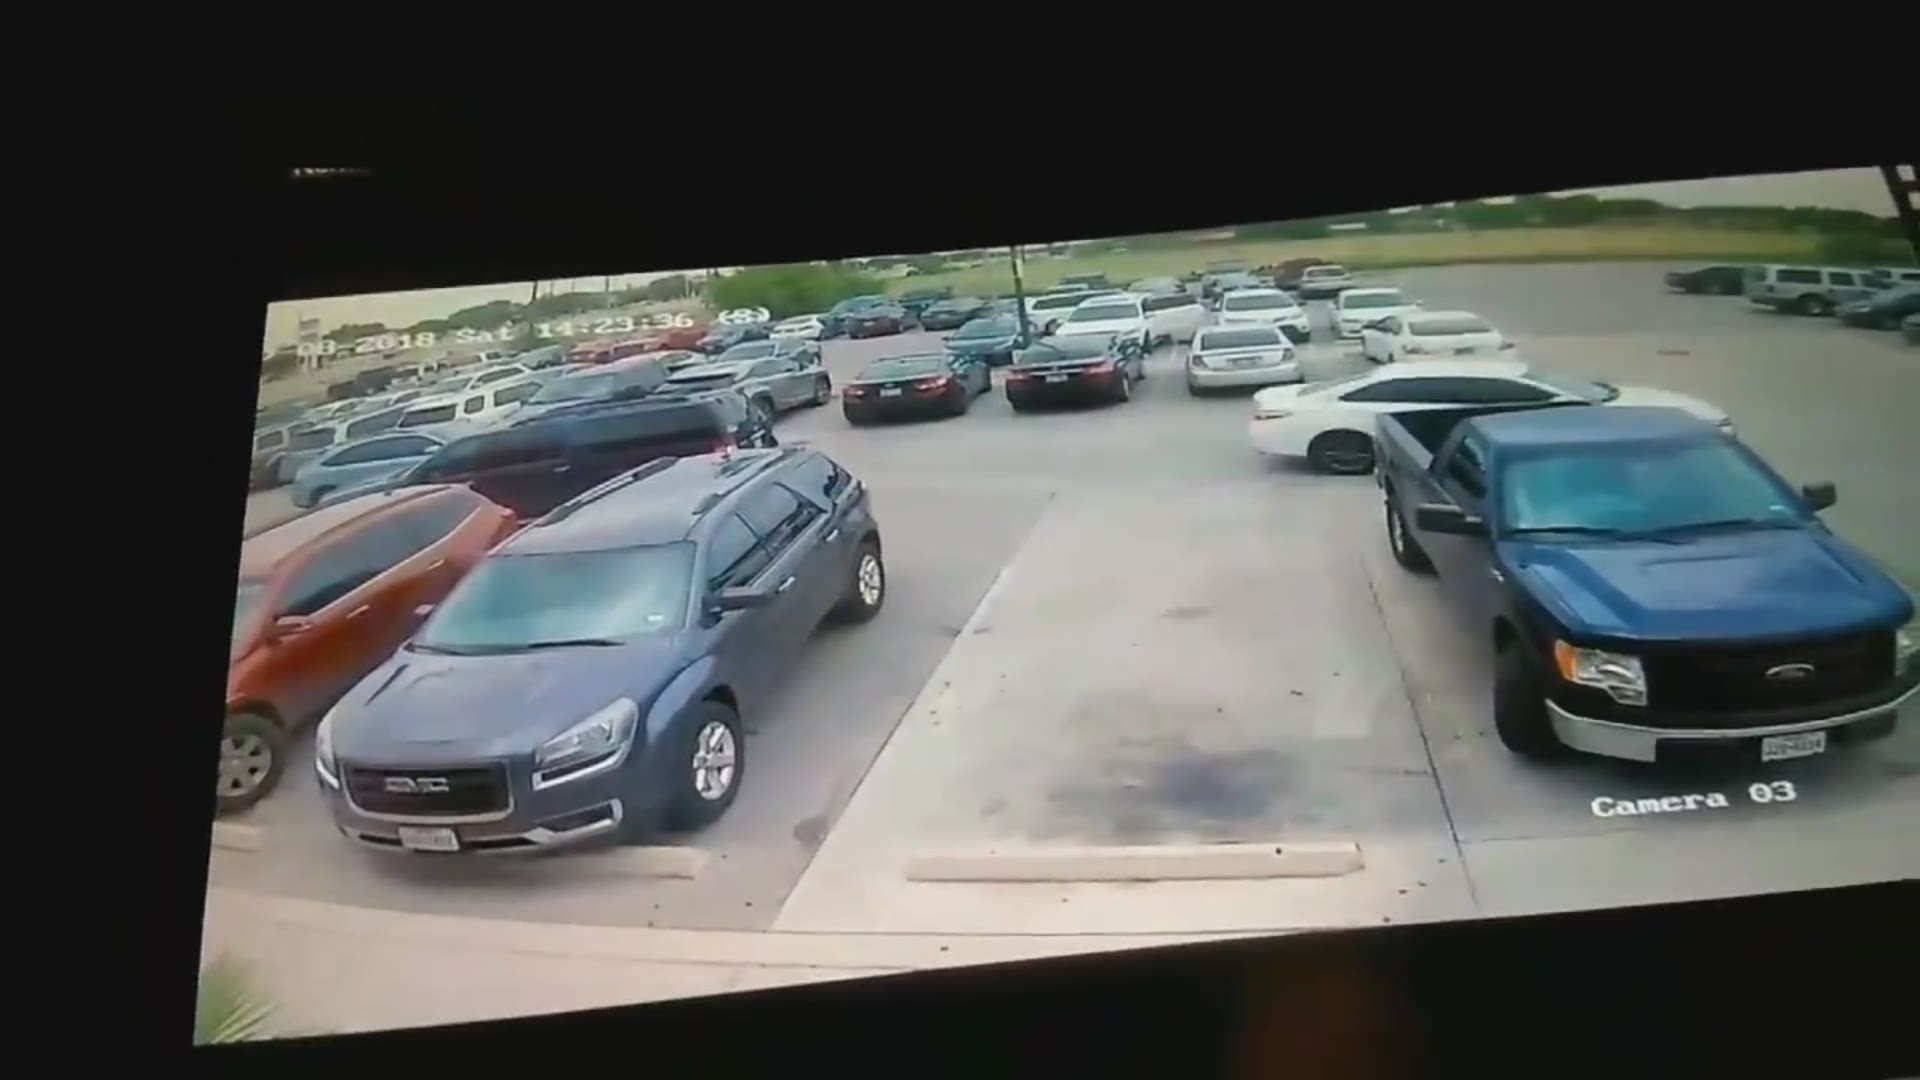 PARKING LOT BRAWL: We're now seeing surveillance video from an ugly fight that broke out over a parking space at the Golden Wok near Loop 410 and Marbach back in September. WARNING: Some viewers could find this video disturbing.